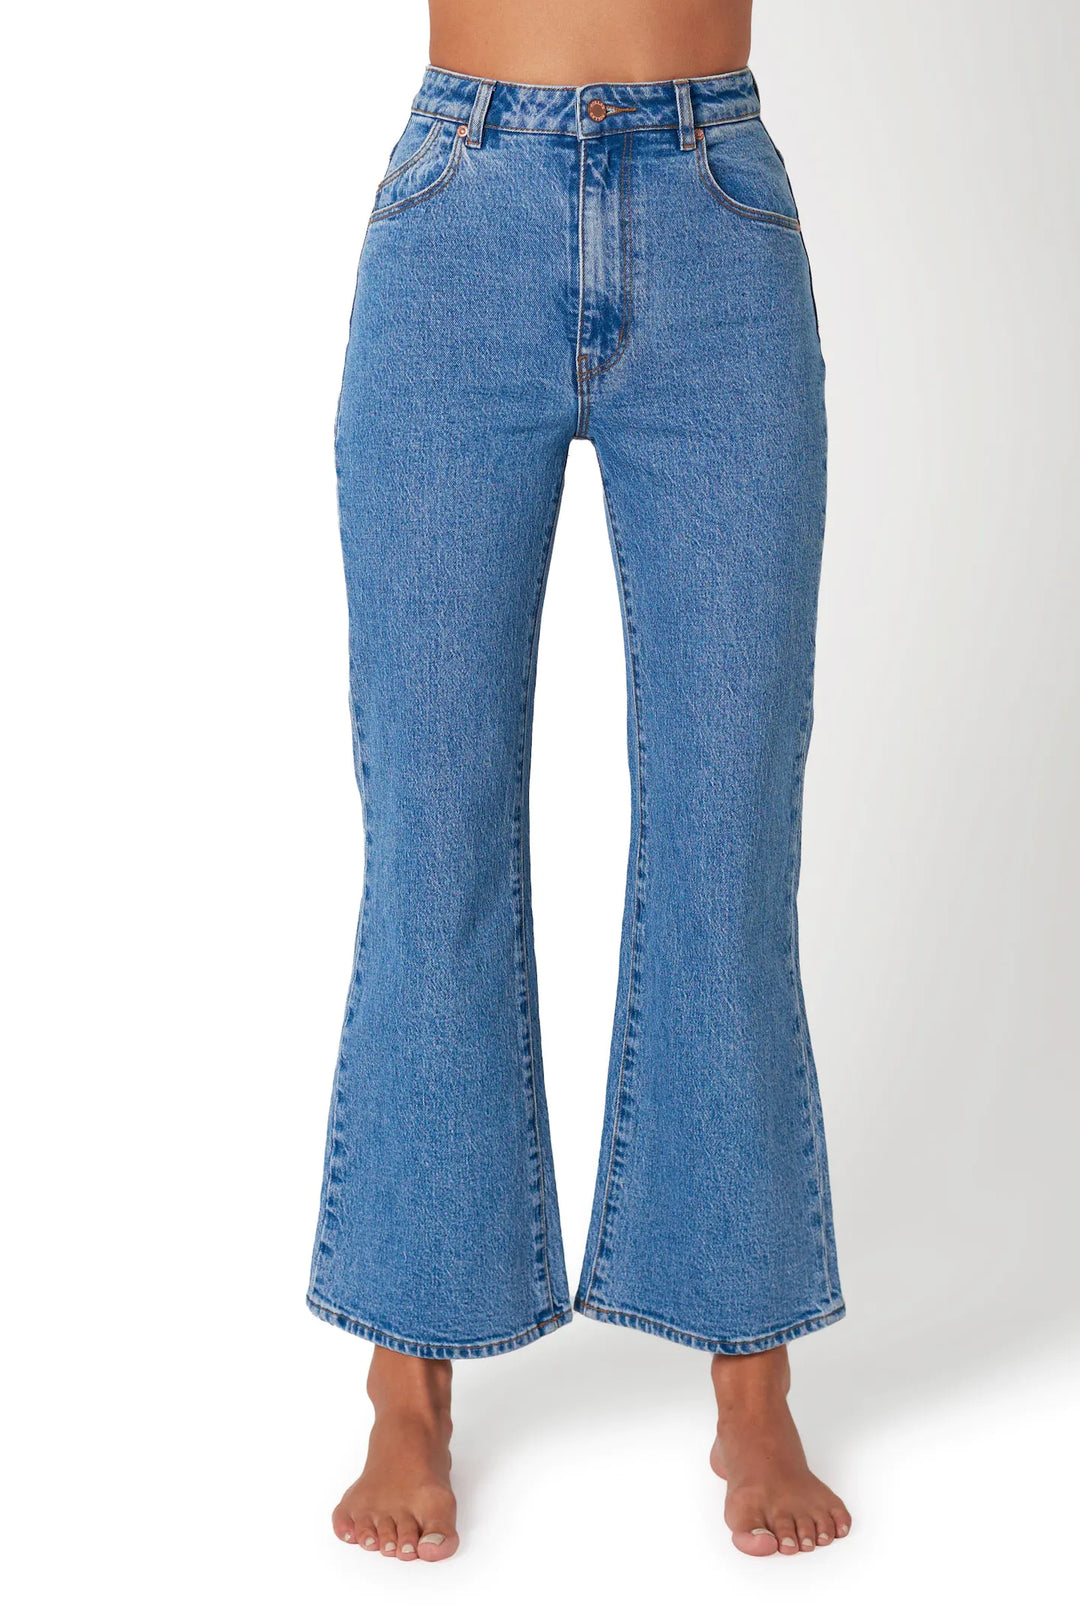 Rolla's Eastcoast Flare Ankle Jean - Lucy Blue Mid Vintage Blue